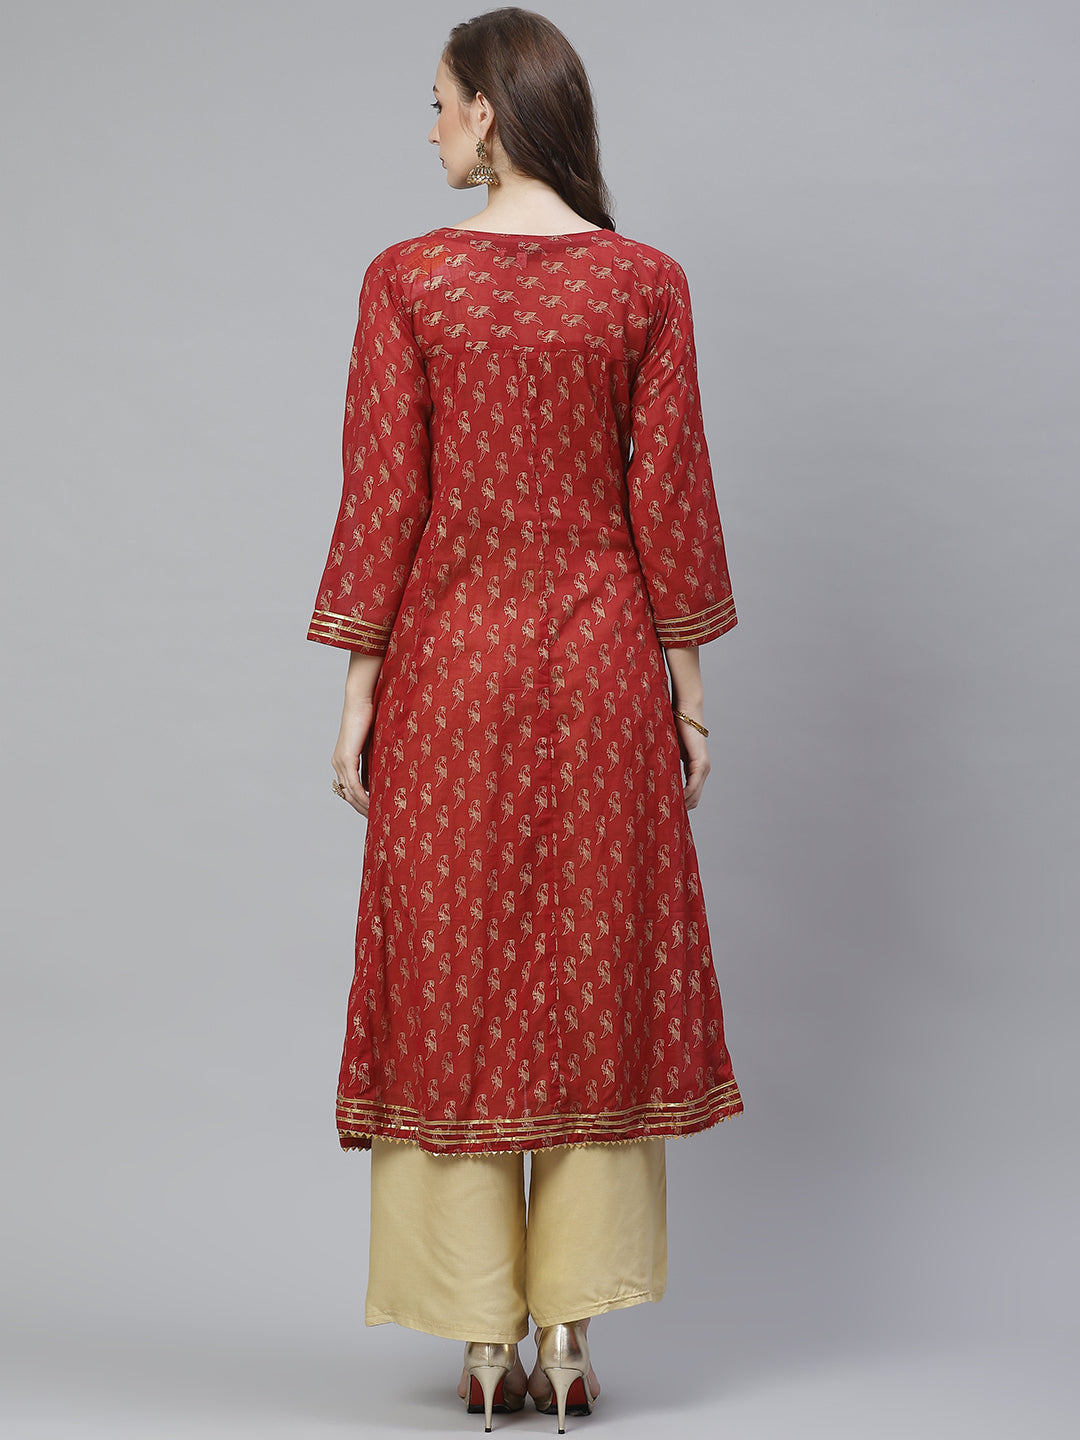 Women's Maroon And Golden Quirky Block Printed A-Line Kurta - Bhama Couture